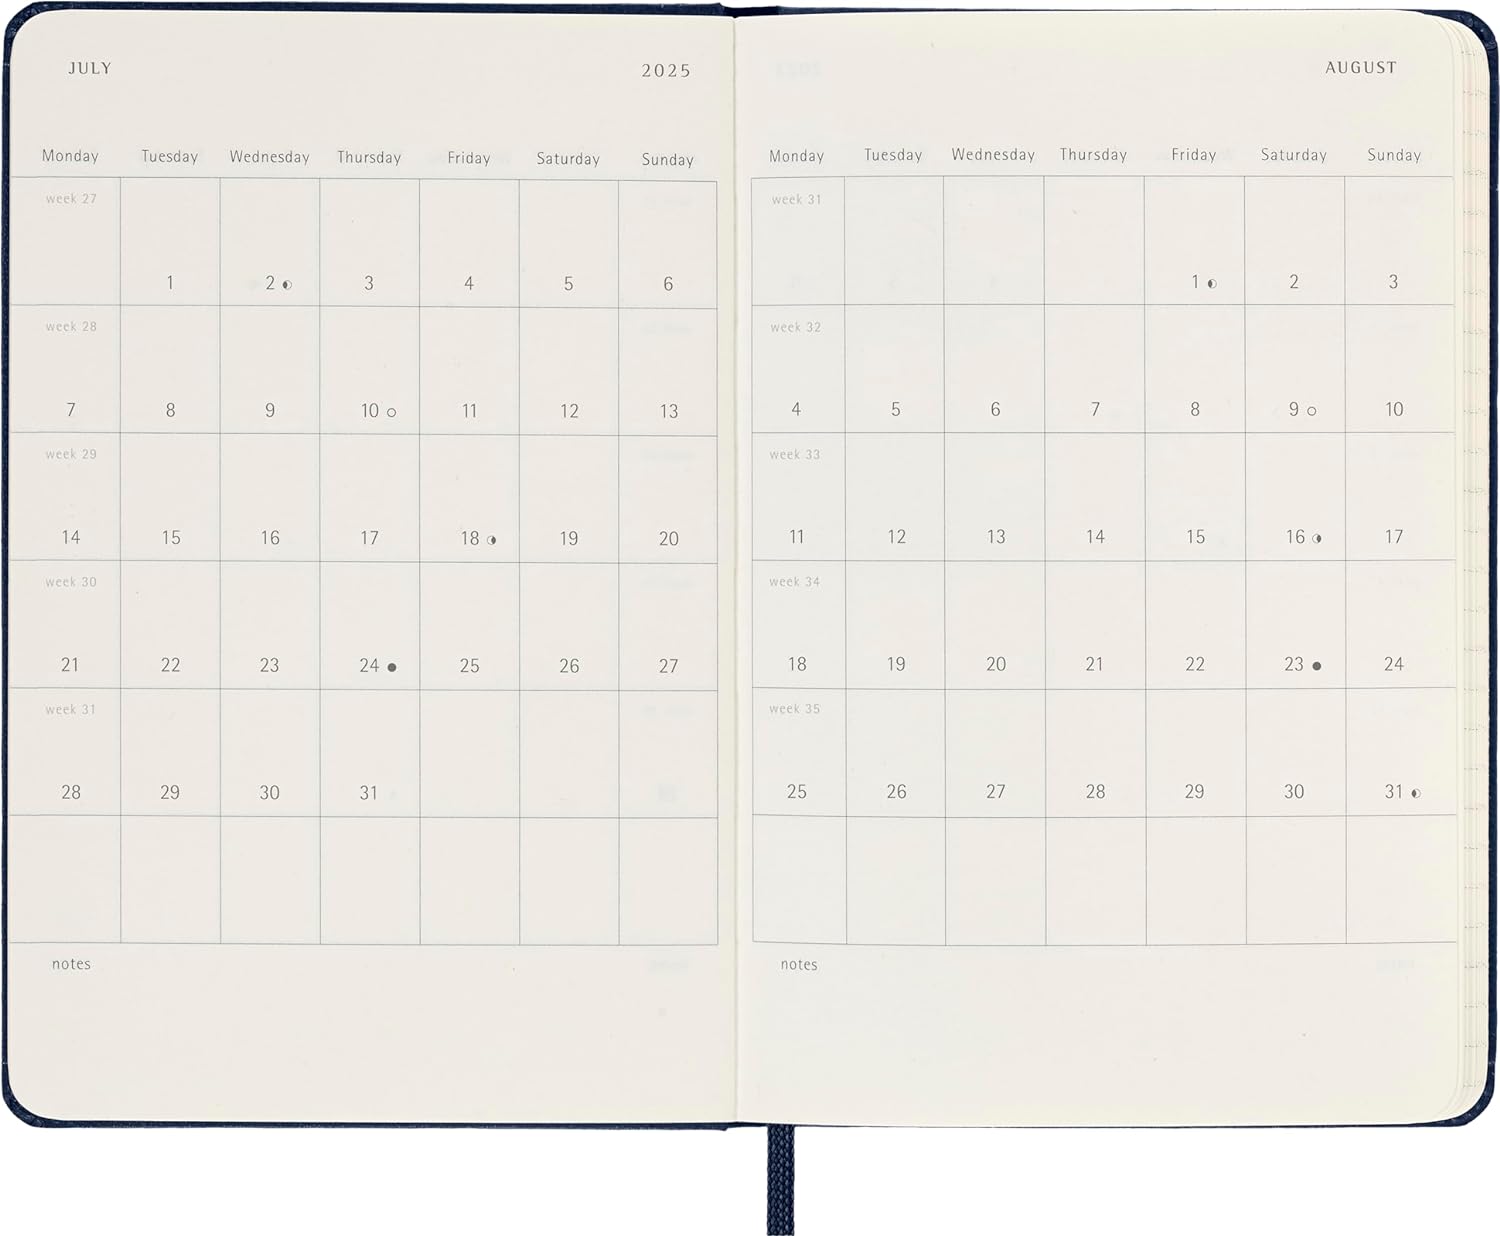 Moleskine Classic Weekly Planner (2024-2025) | 18 Months | Compact at a Mere 208 Pages